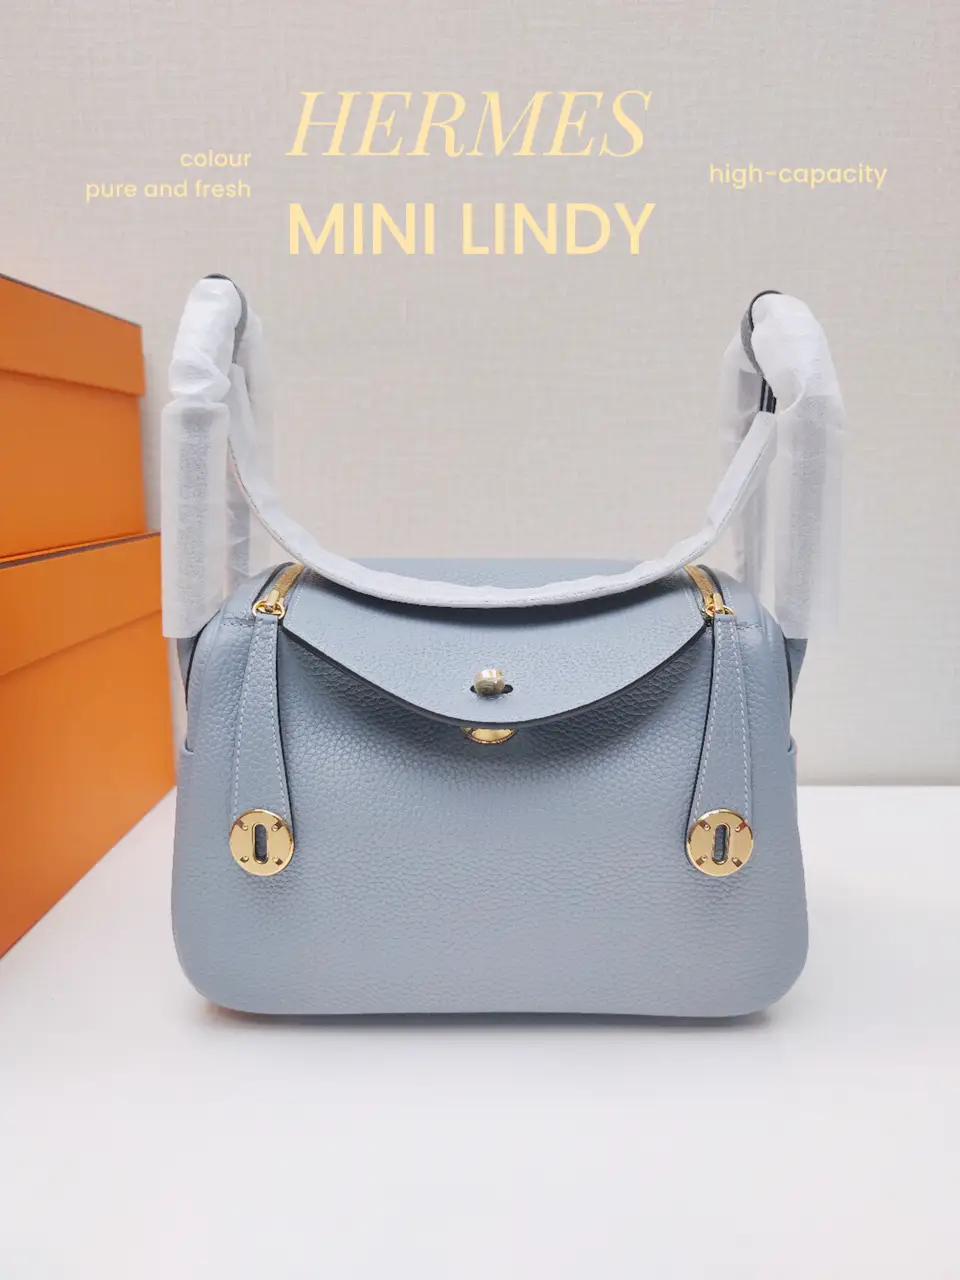 Style your Mini Lindy like this and look fashionably chic! #hermes #mi